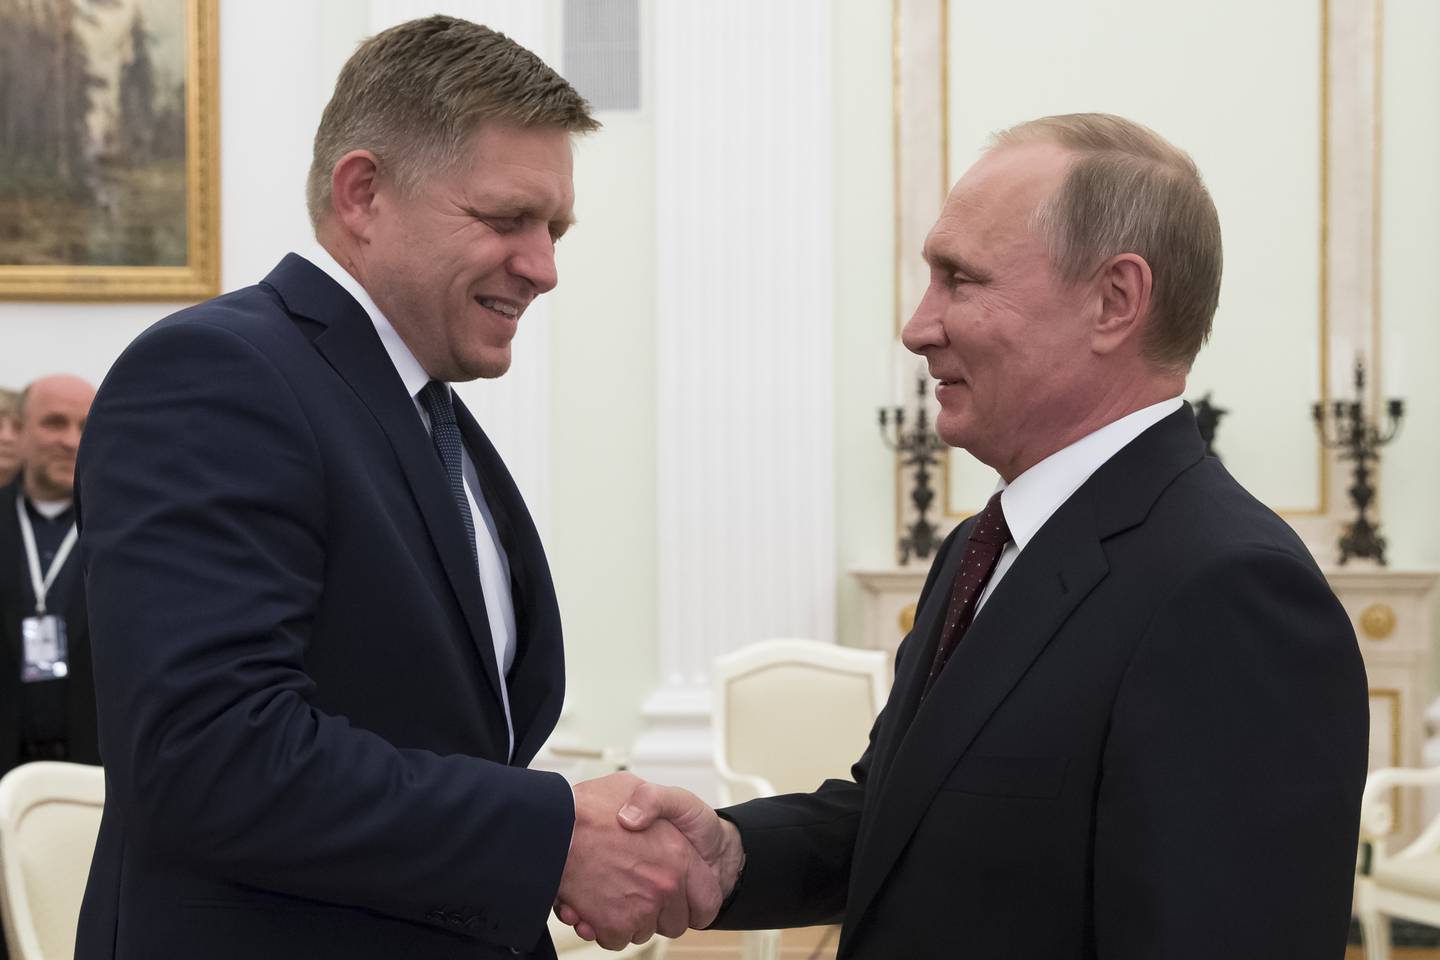 CORRECTING ID TO SLOVAK PRIME MINISTER ROBERT FICO - Russian President Vladimir Putin, right, shakes hands with Slovak Prime Minister Robert Fico during their meeting in the Kremlin in Moscow, Russia, Thursday, Aug. 25, 2016. (AP Photo/Alexander Zemlianichenko, pool)